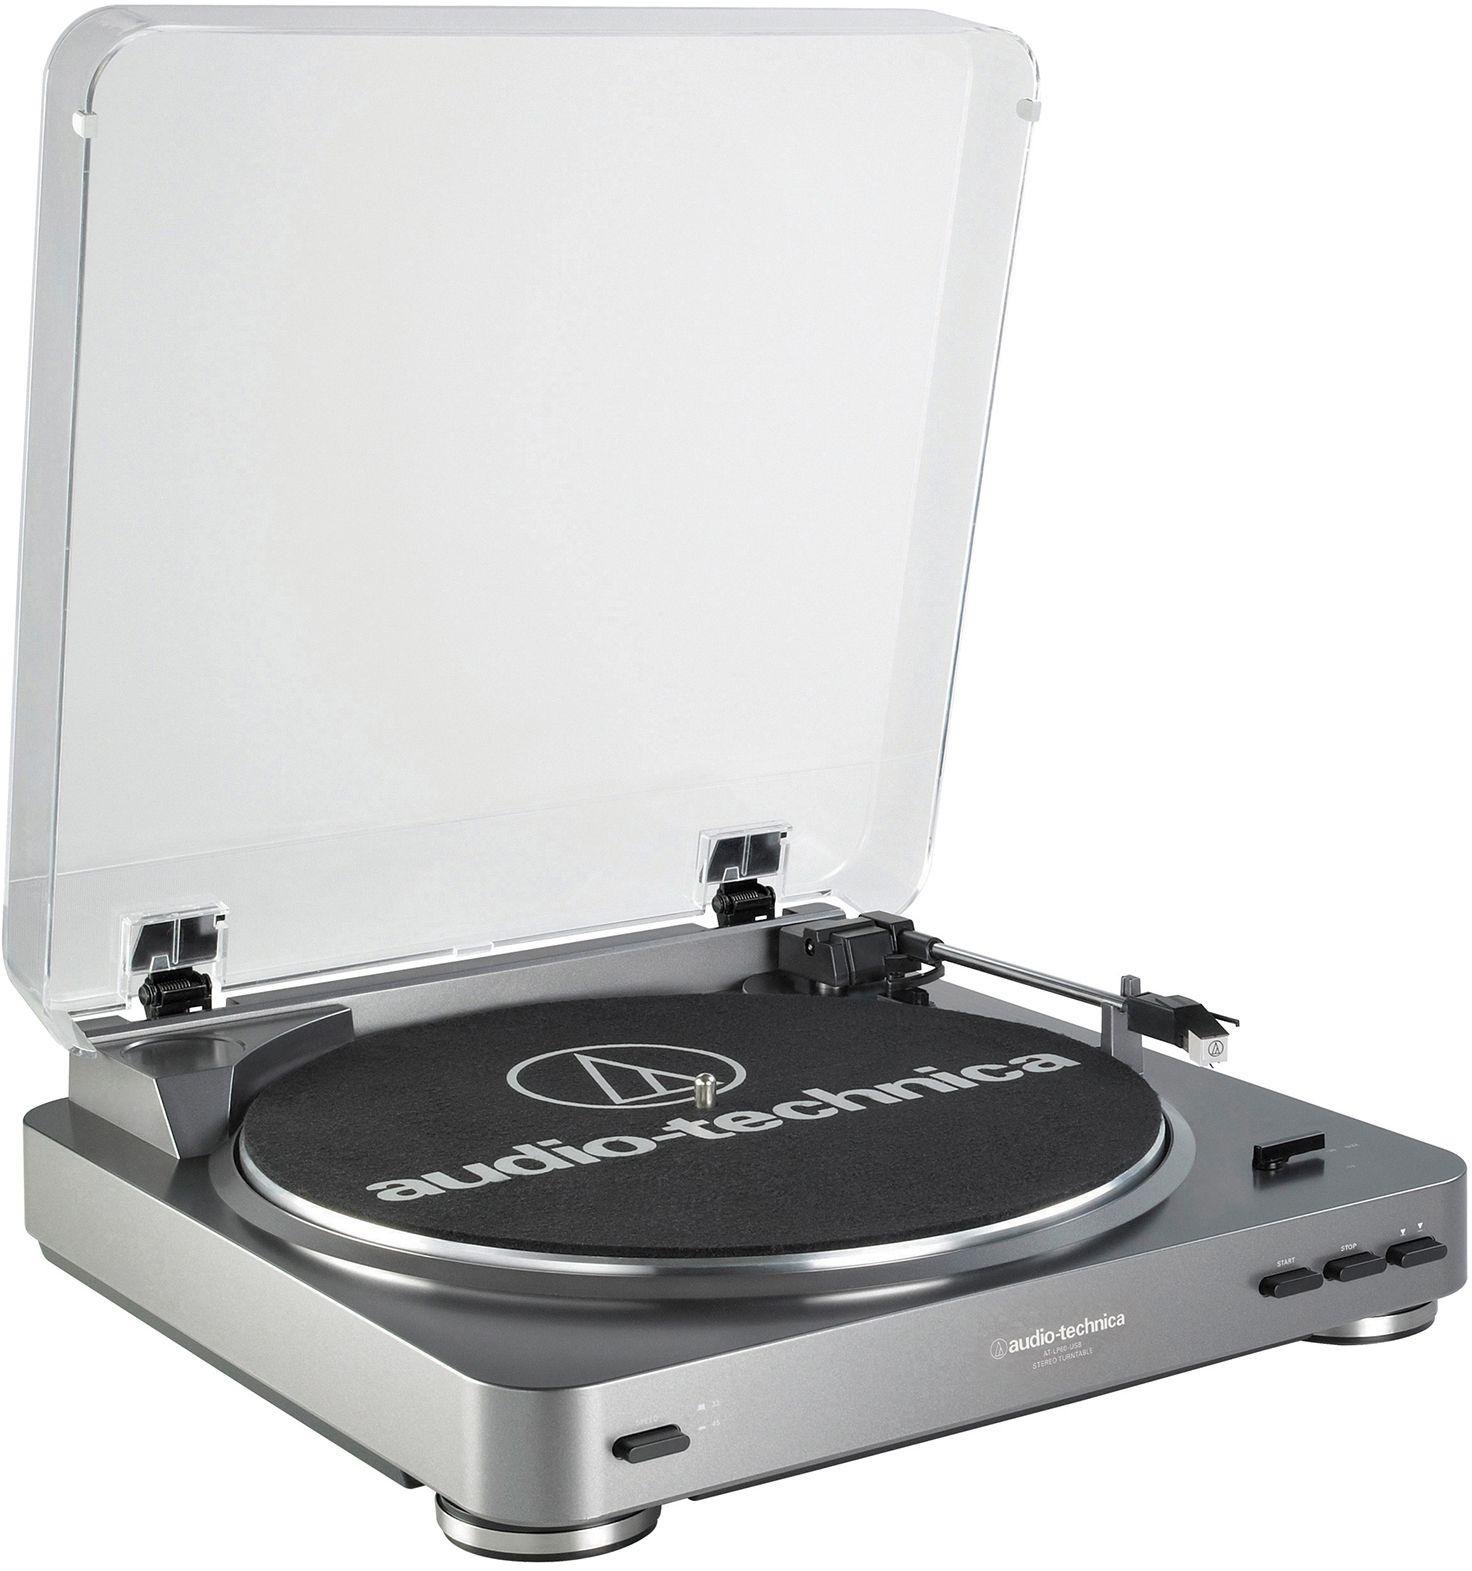 Audio-Technica AT-LP60USB Automatic USB Turntable - Silver